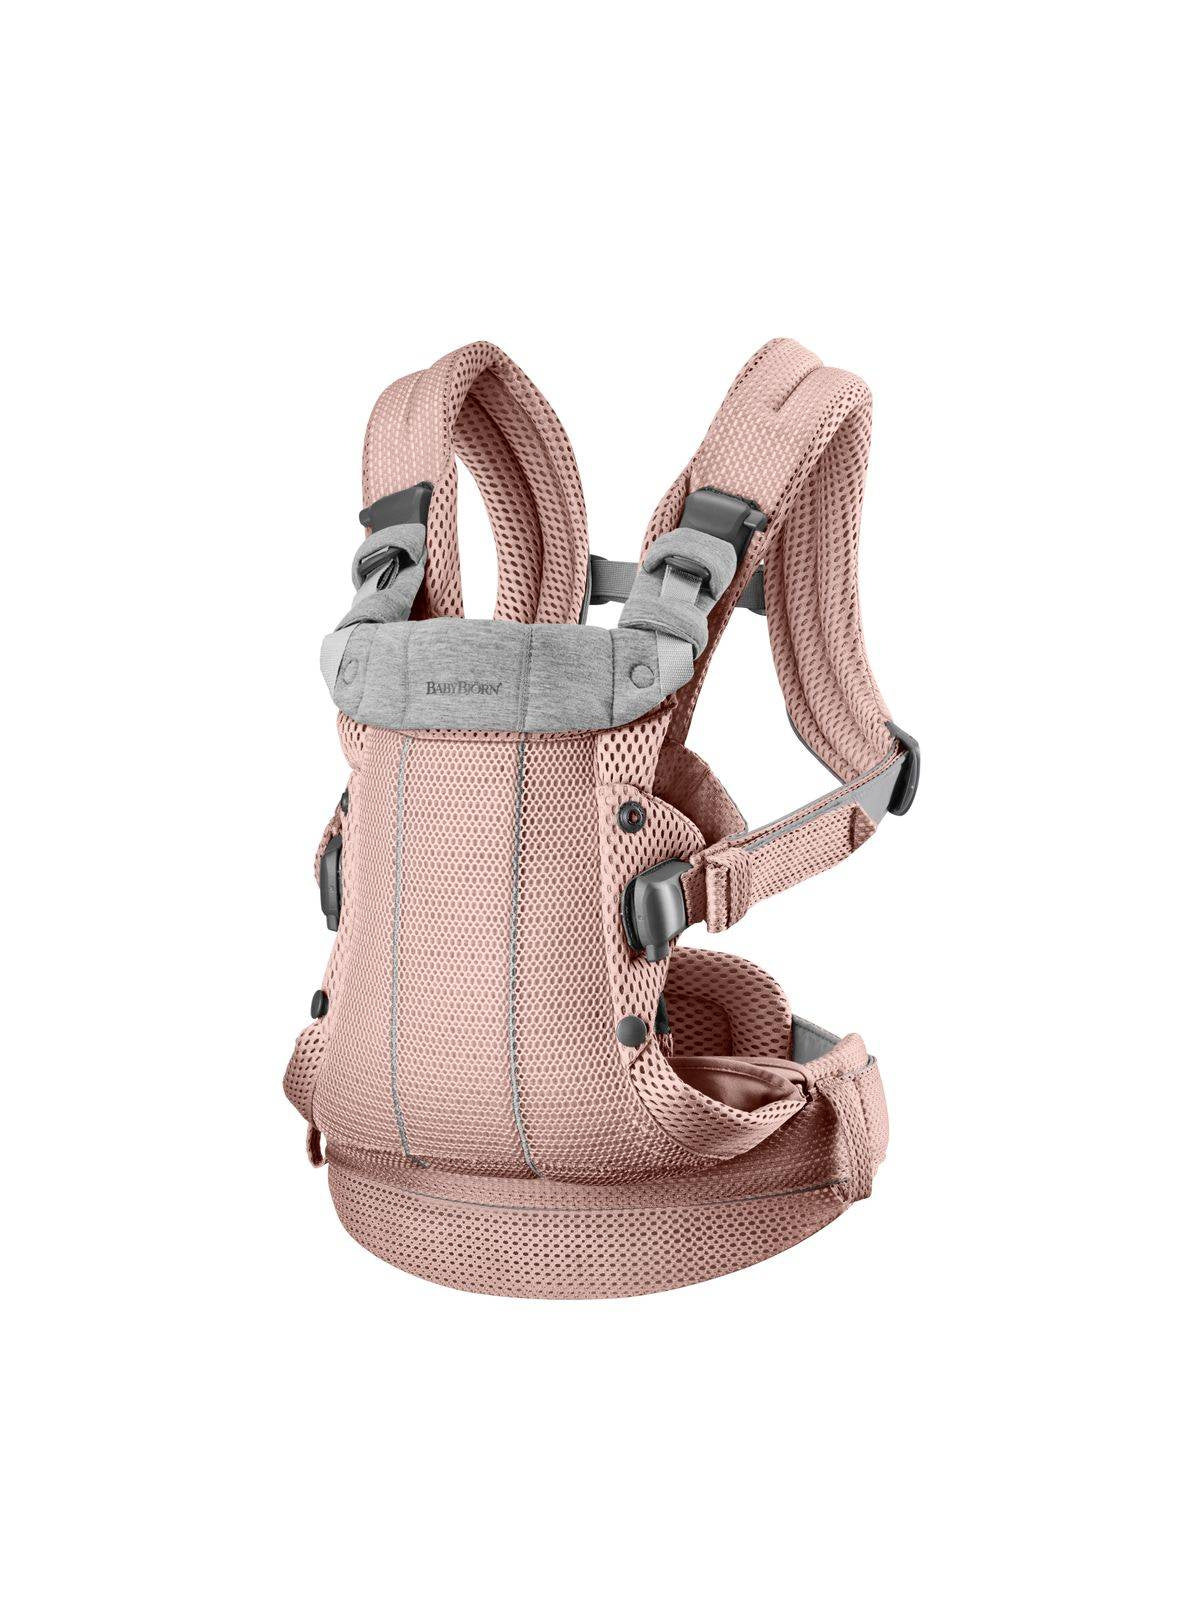 Babybjorn - Harmony 3d Mesh Baby Carrier, Dusty Pink